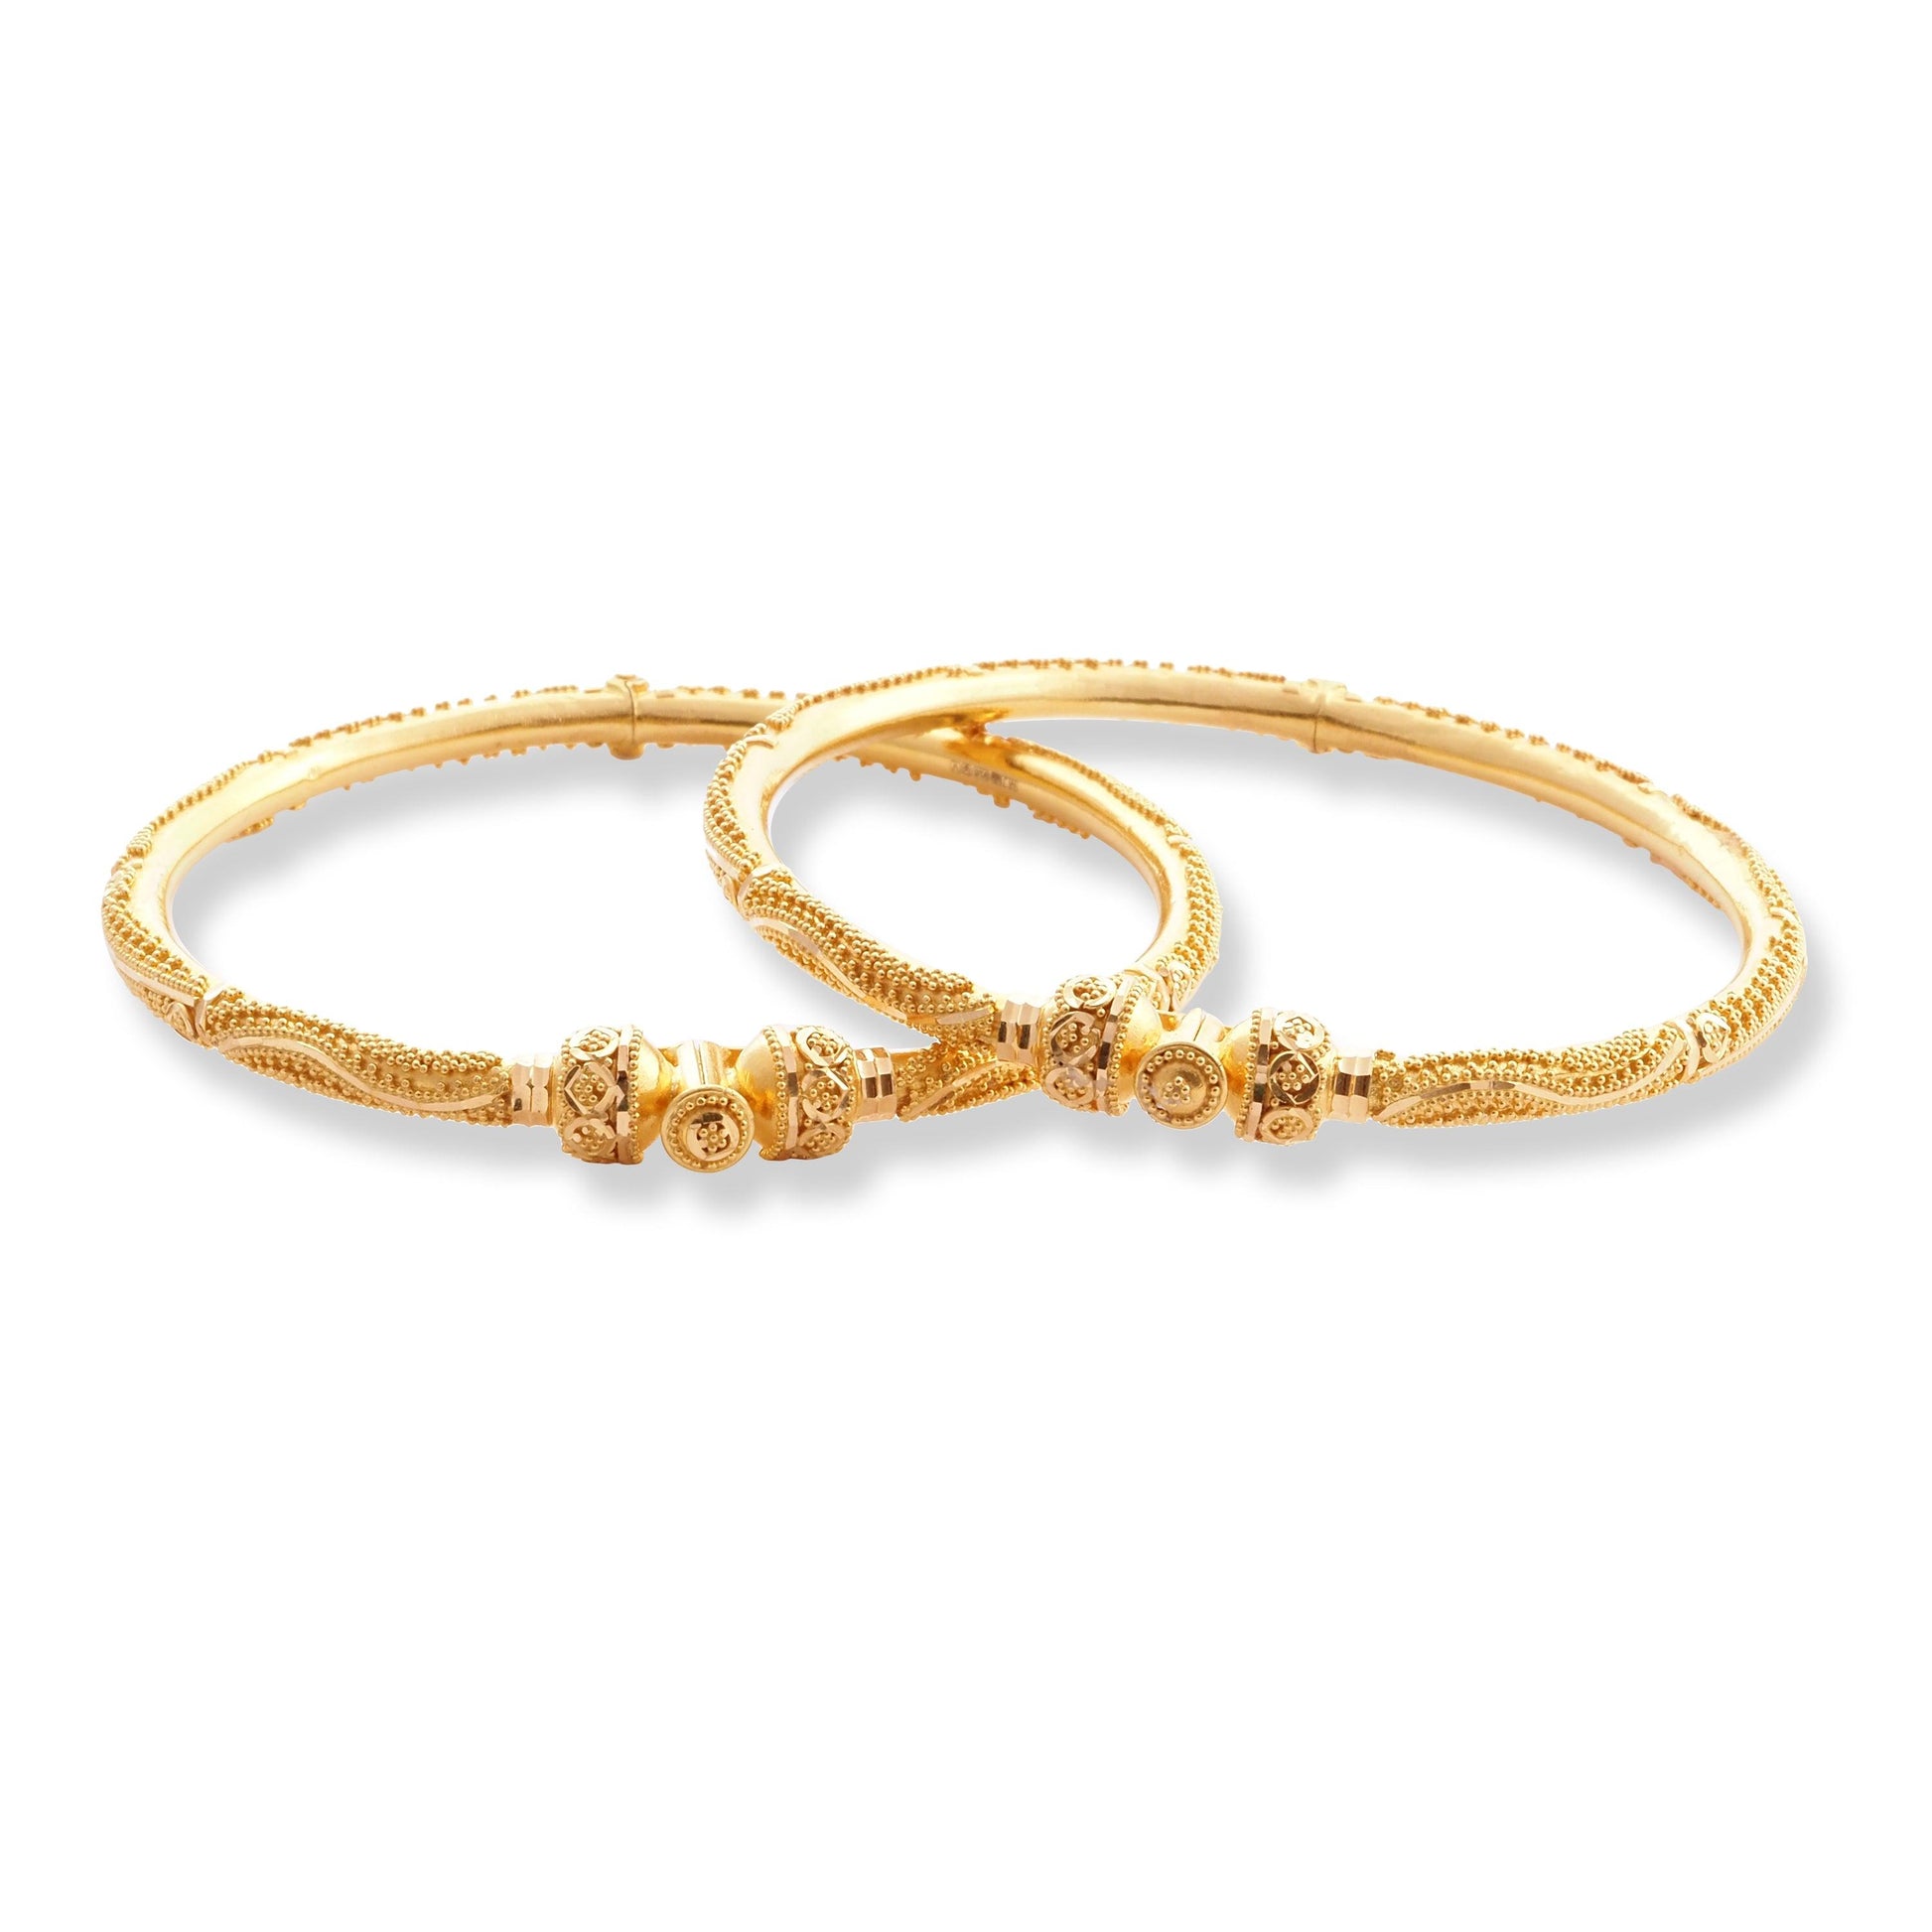 Pair of 22ct Hollow Tube Bangles With Hinge & Openable Screw Fitting B-8587 - Minar Jewellers